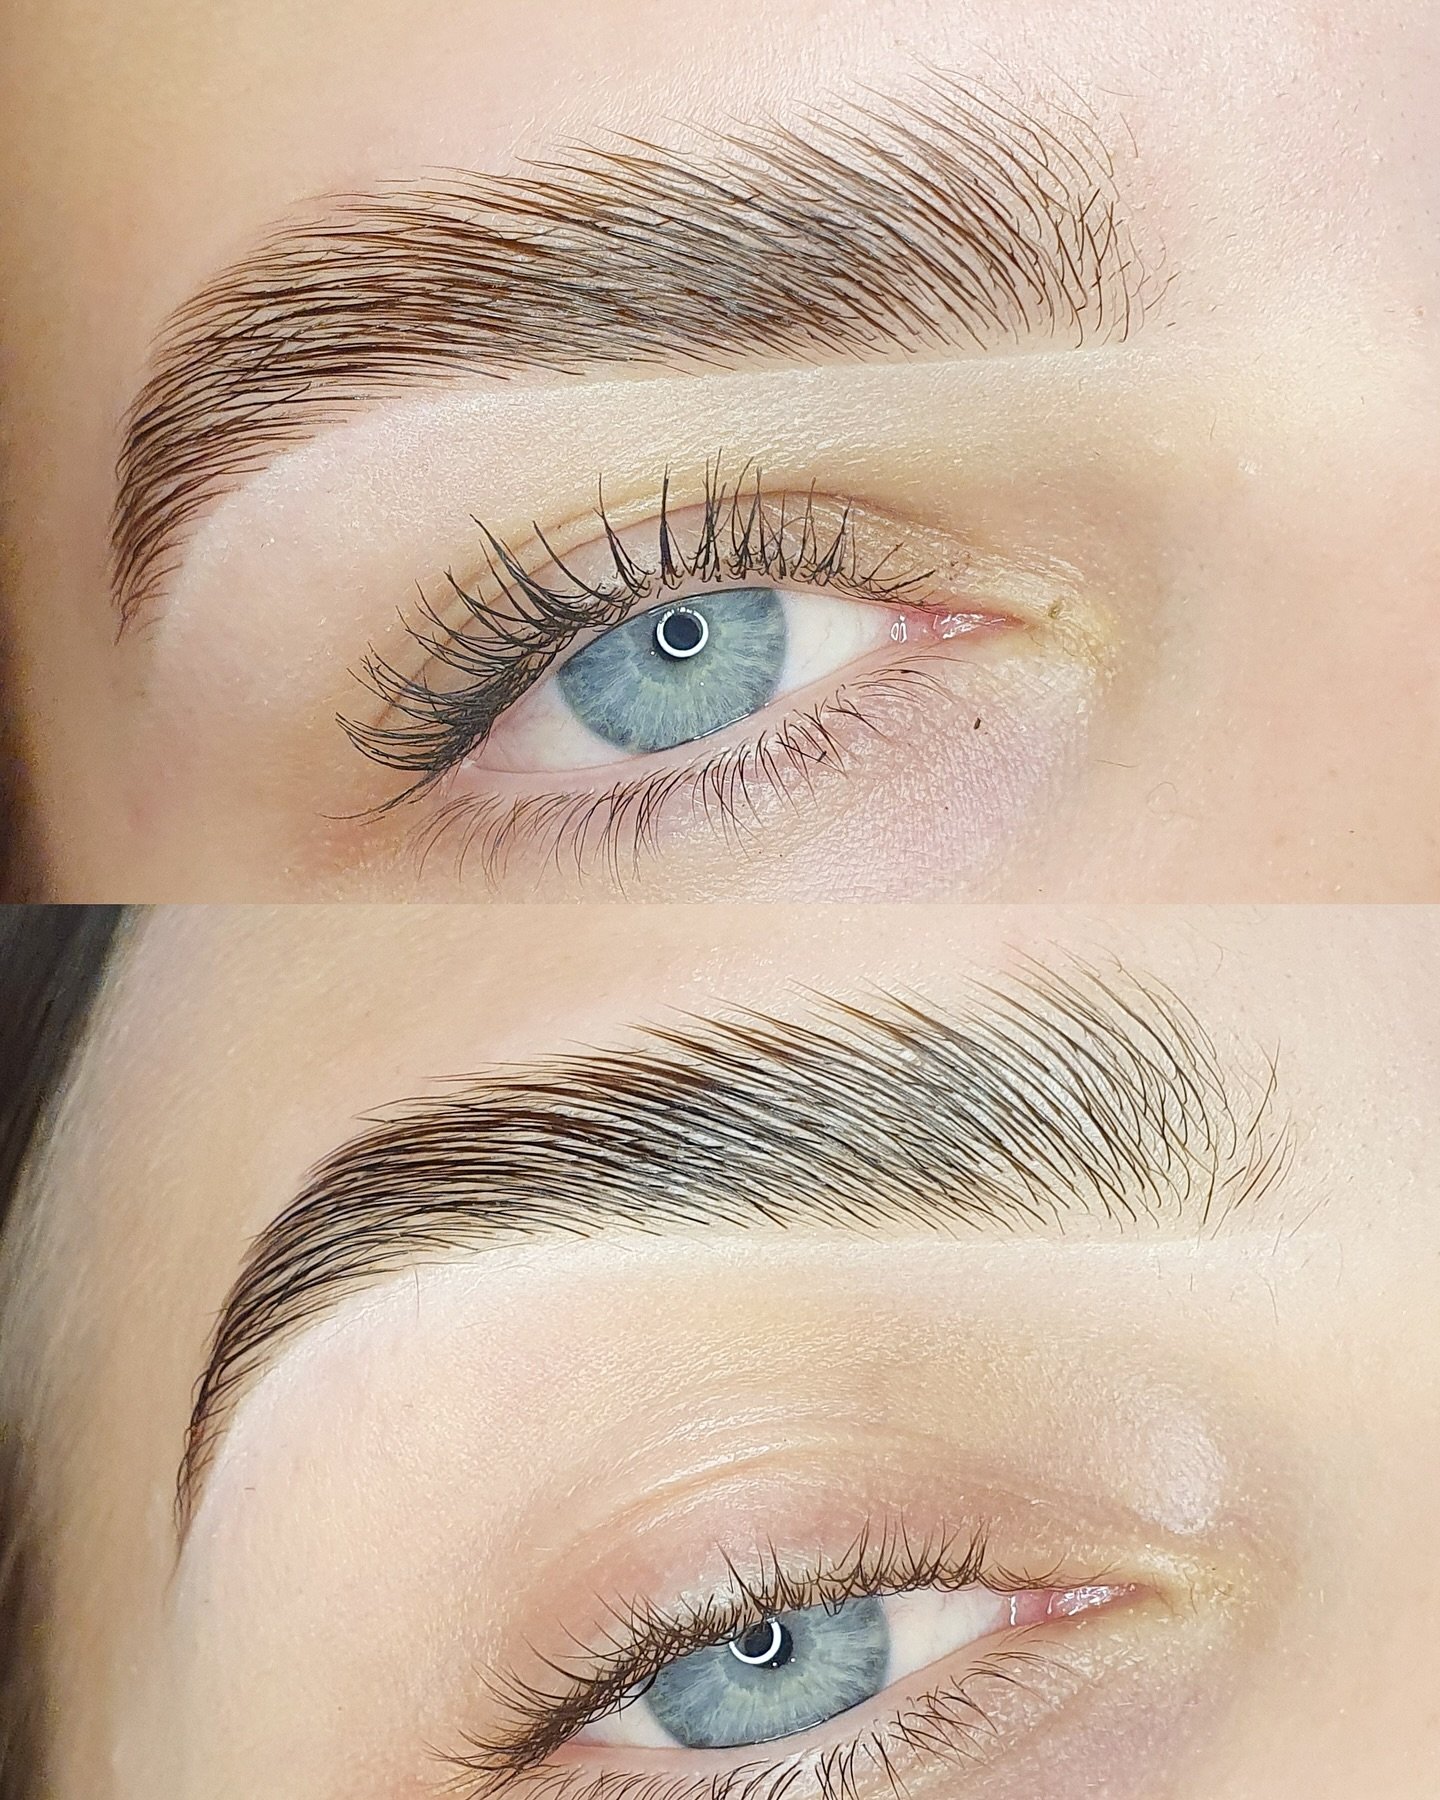 SAME BROW DIFFERENT LAMINATION STYLE!!! 
Top one is more fluffy vibes and bottom one is more &lsquo;sleek&rsquo; vibes&hellip;. 
Which style is your fave??? 🙌🏼

&mdash;&mdash; 

#browlamination #minilamination #eyebrows #brows #browshaping #perthbr